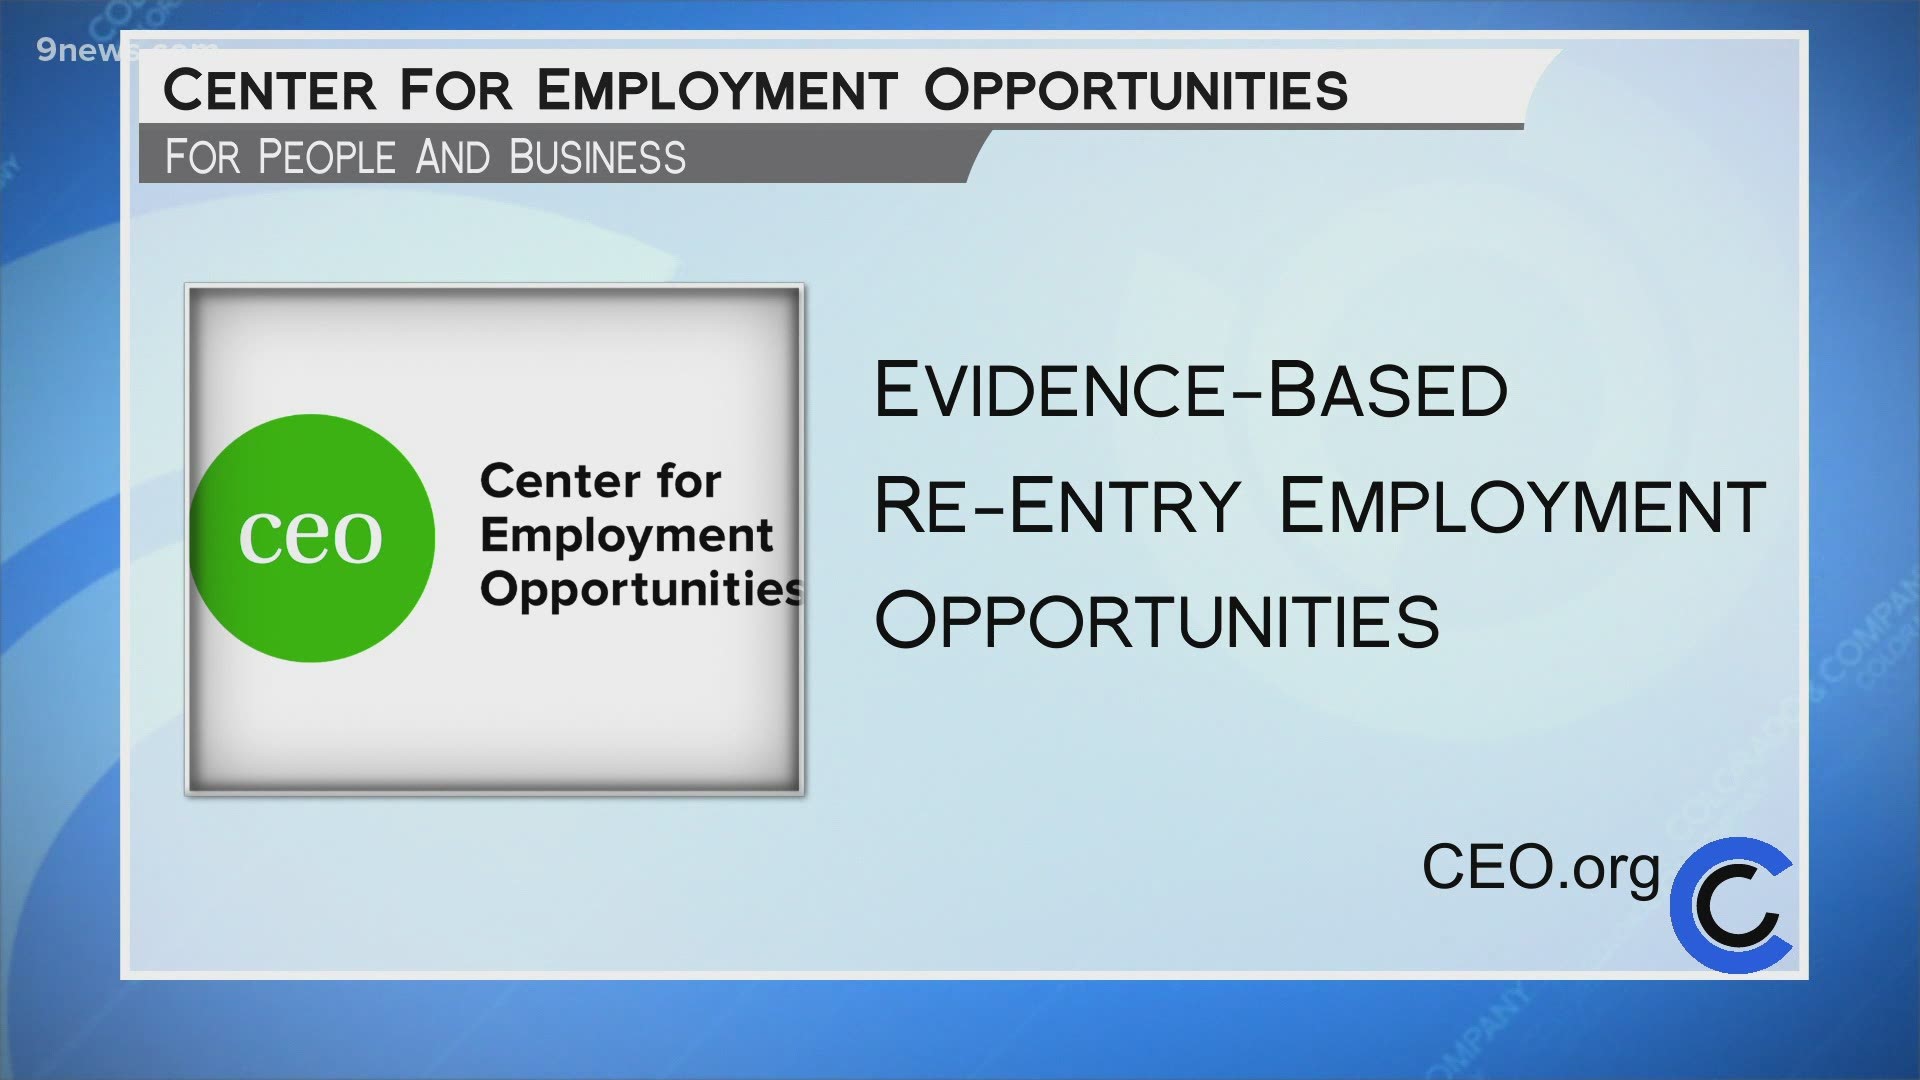 The Center for Employment Opportunities is the largest re-entry employment provider in the country. Learn more and support their efforts at CEOWorks.org.